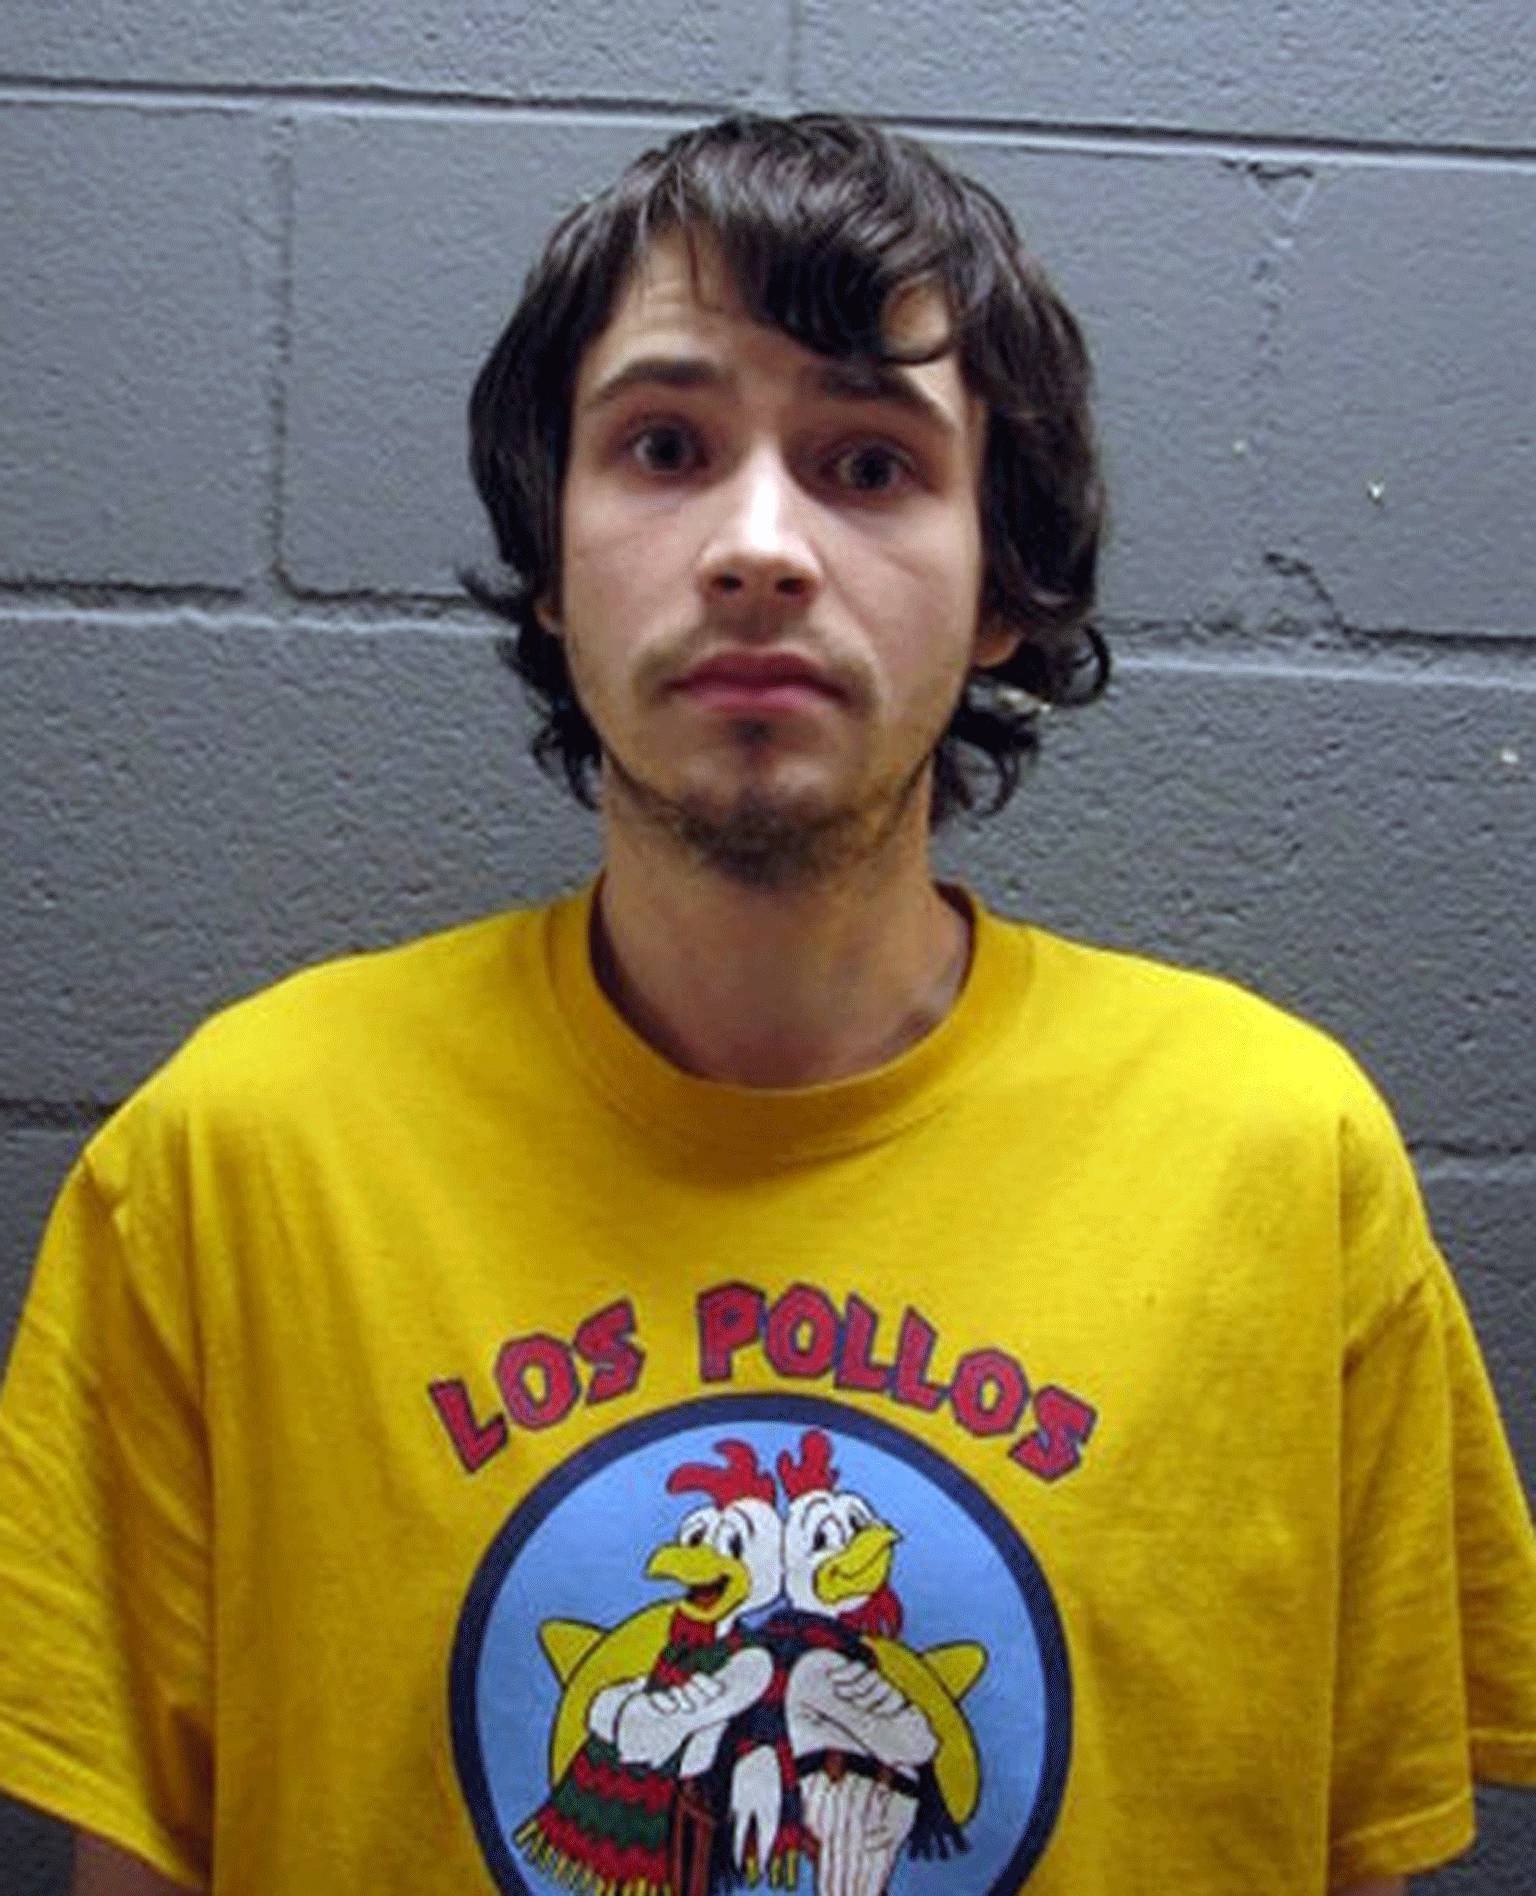 Daniel Kowalski was arrested in July 2013 on similar charges